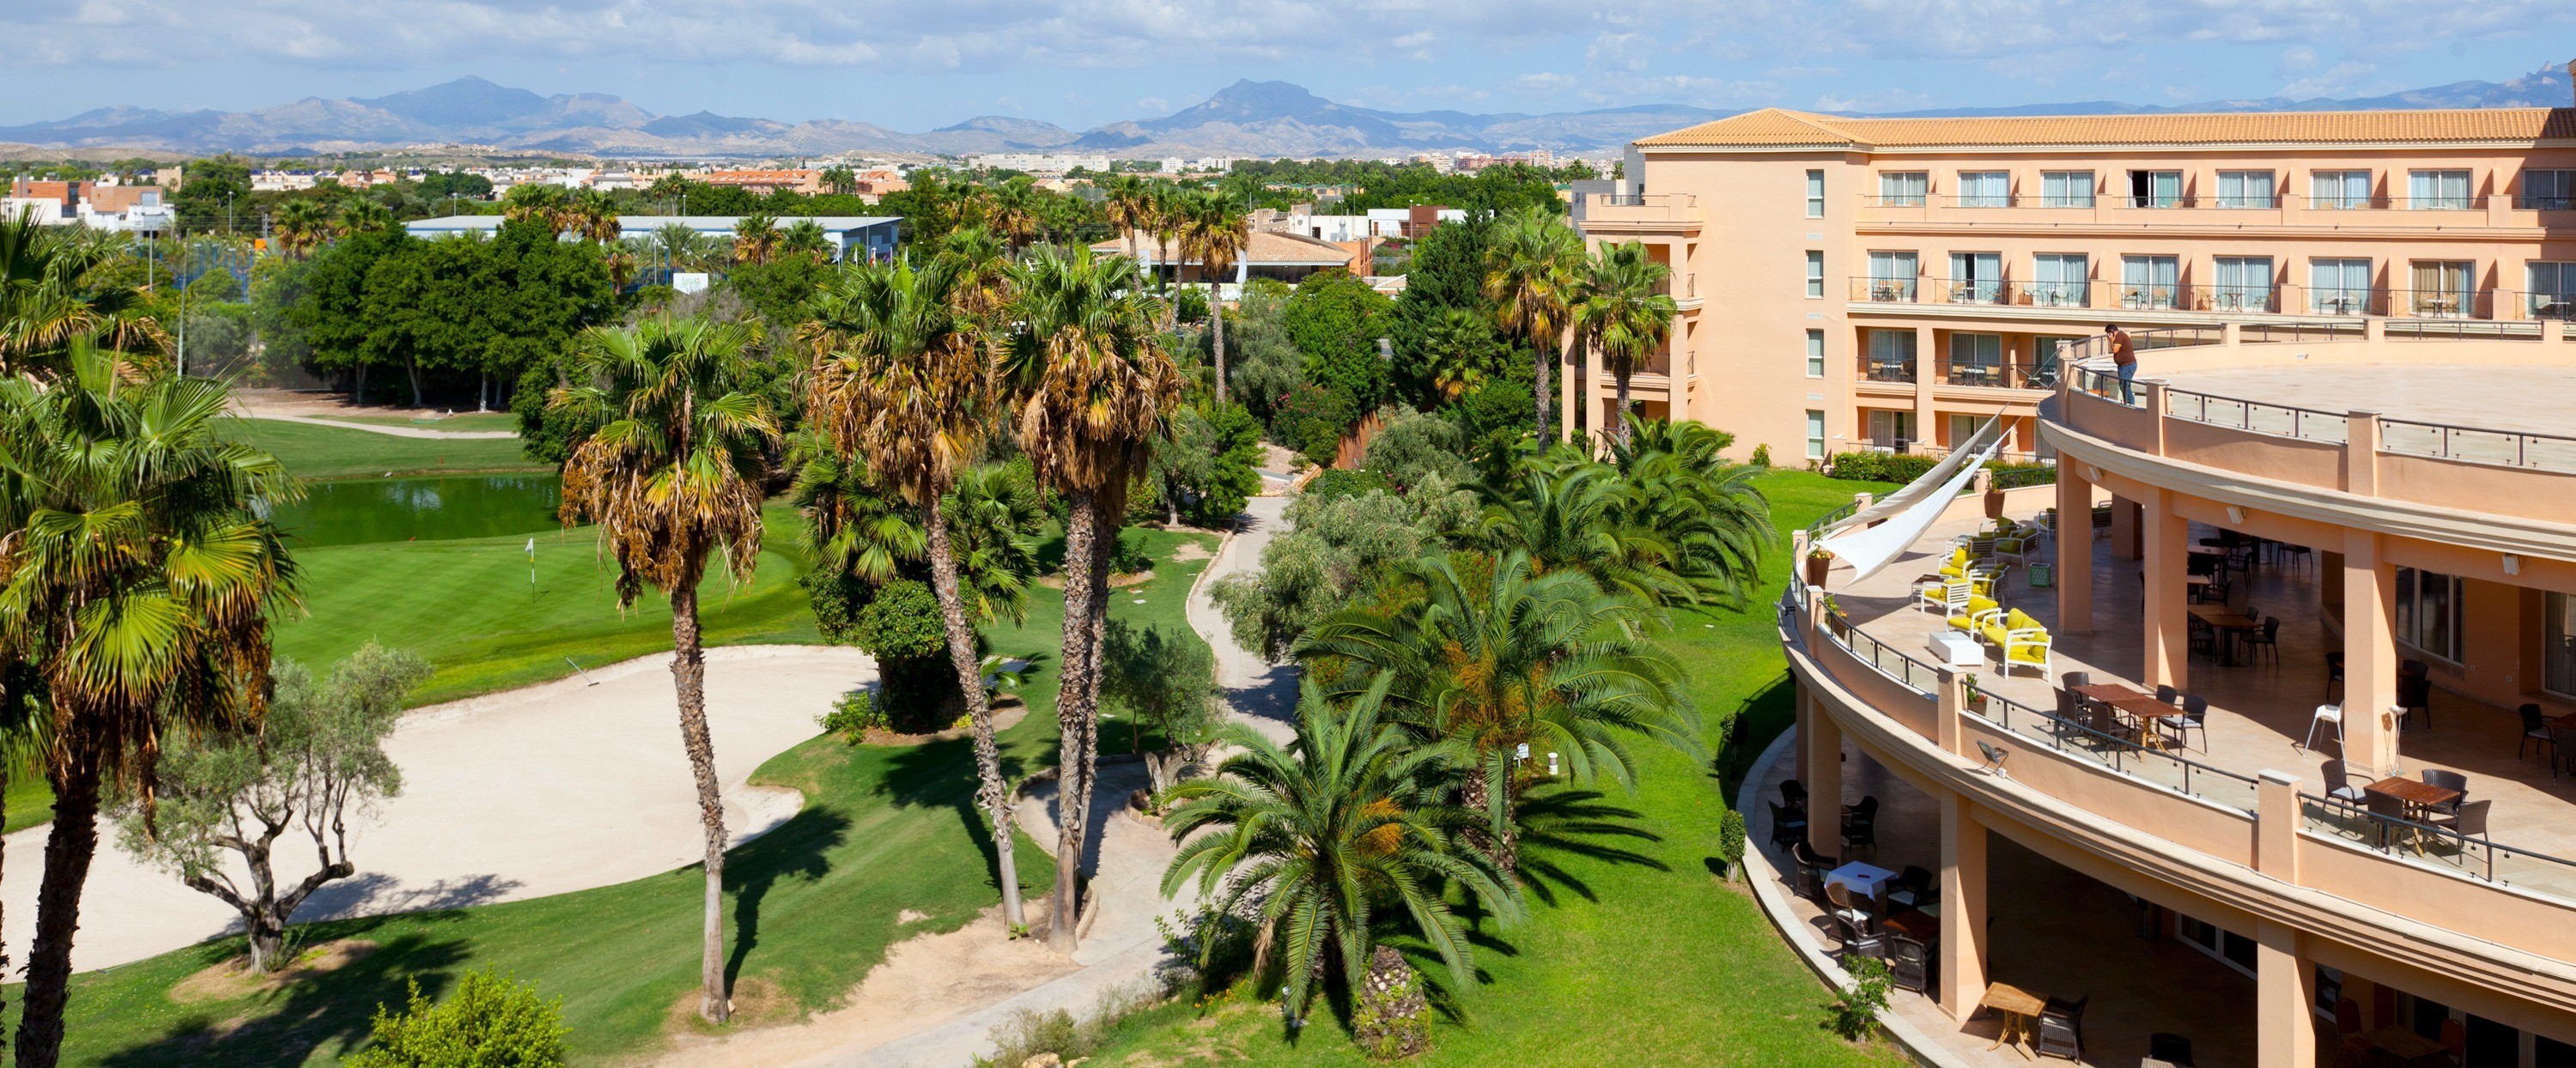 Hotel Alicante | Sportstages